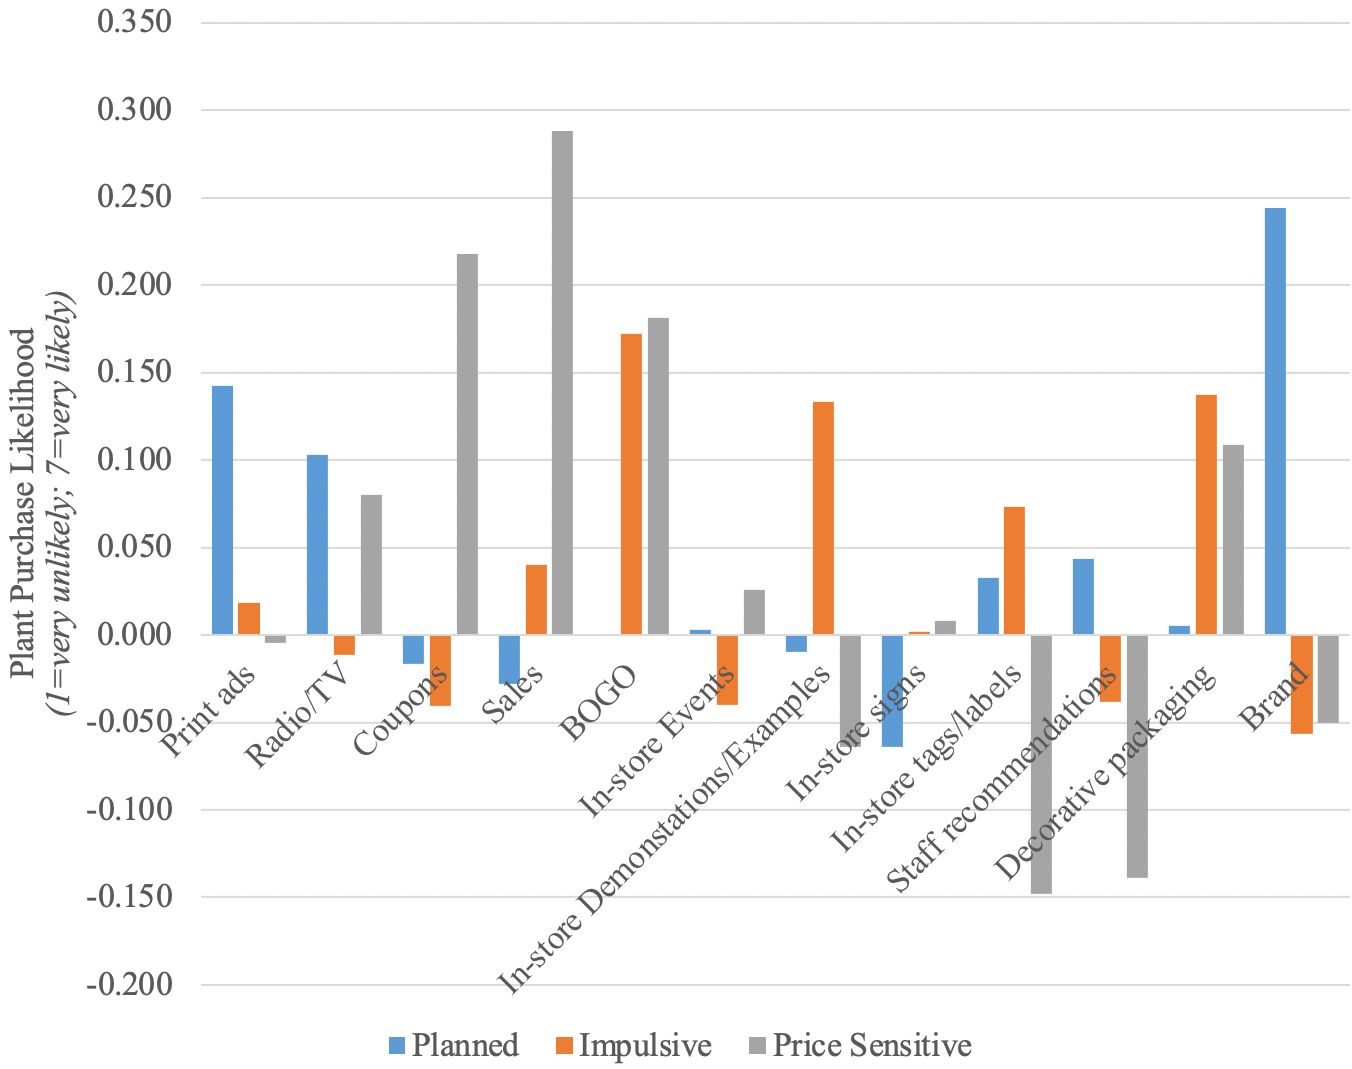 Promotions’ effect on plant purchase likelihood. Note: All results were significant at 10% when compared to the “online advertisements” except for the BOGO, in-store events, and decorative packaging for planners, in-store signs for the impulsive group, and print ads and in-store signs for the price-sensitive group. 